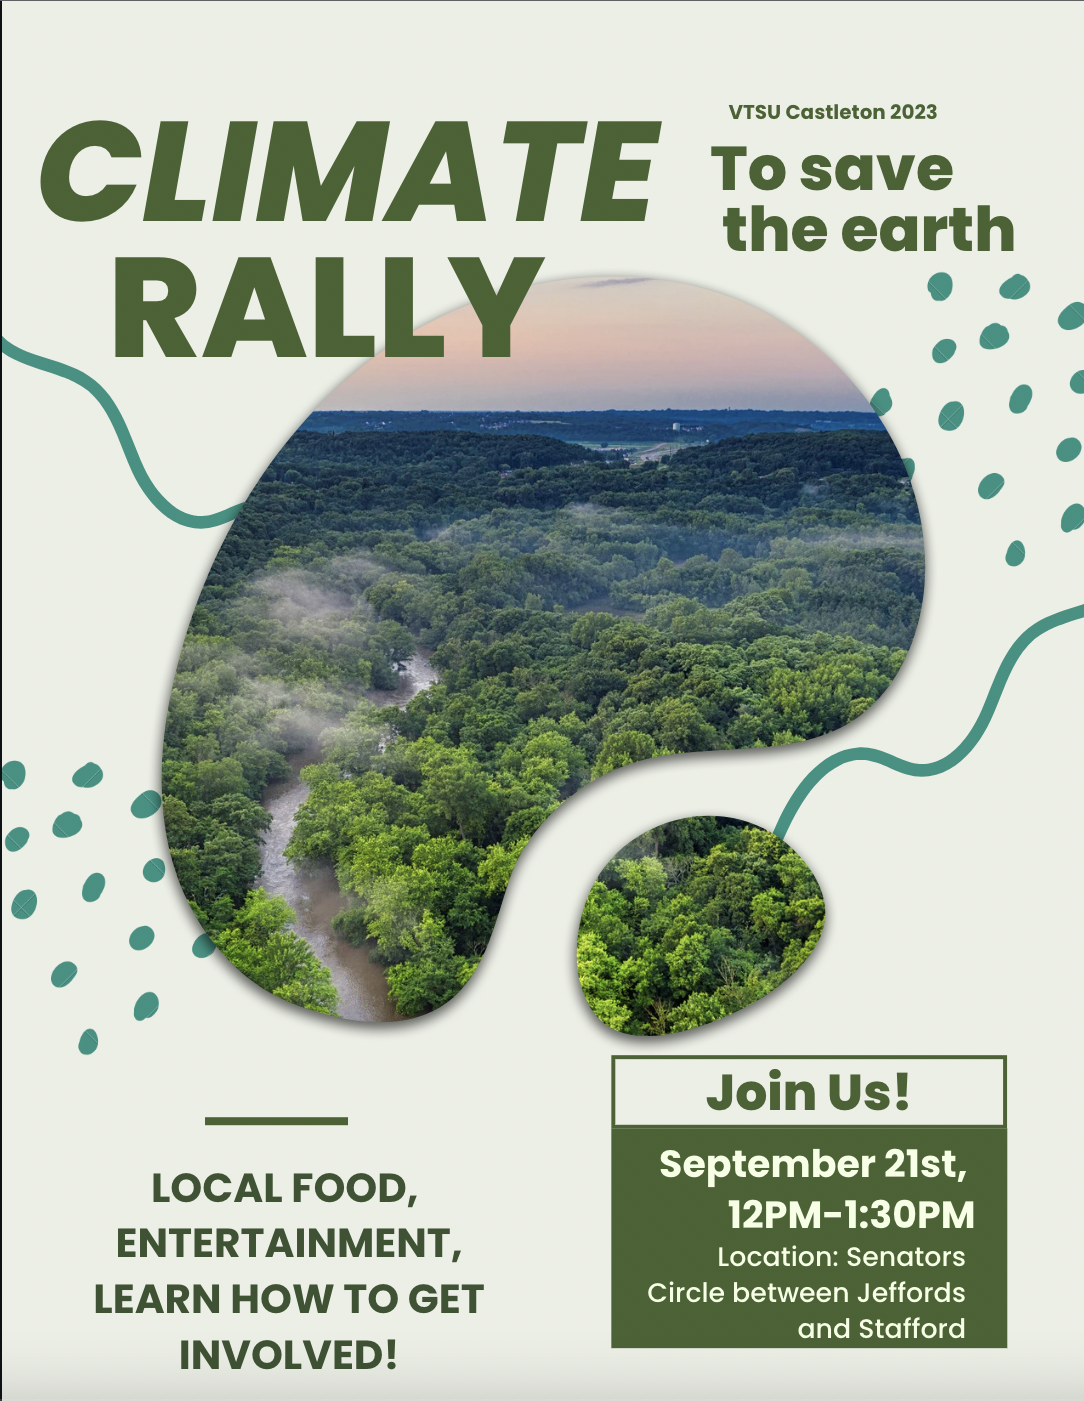 Save the Earth: Climate Rally!